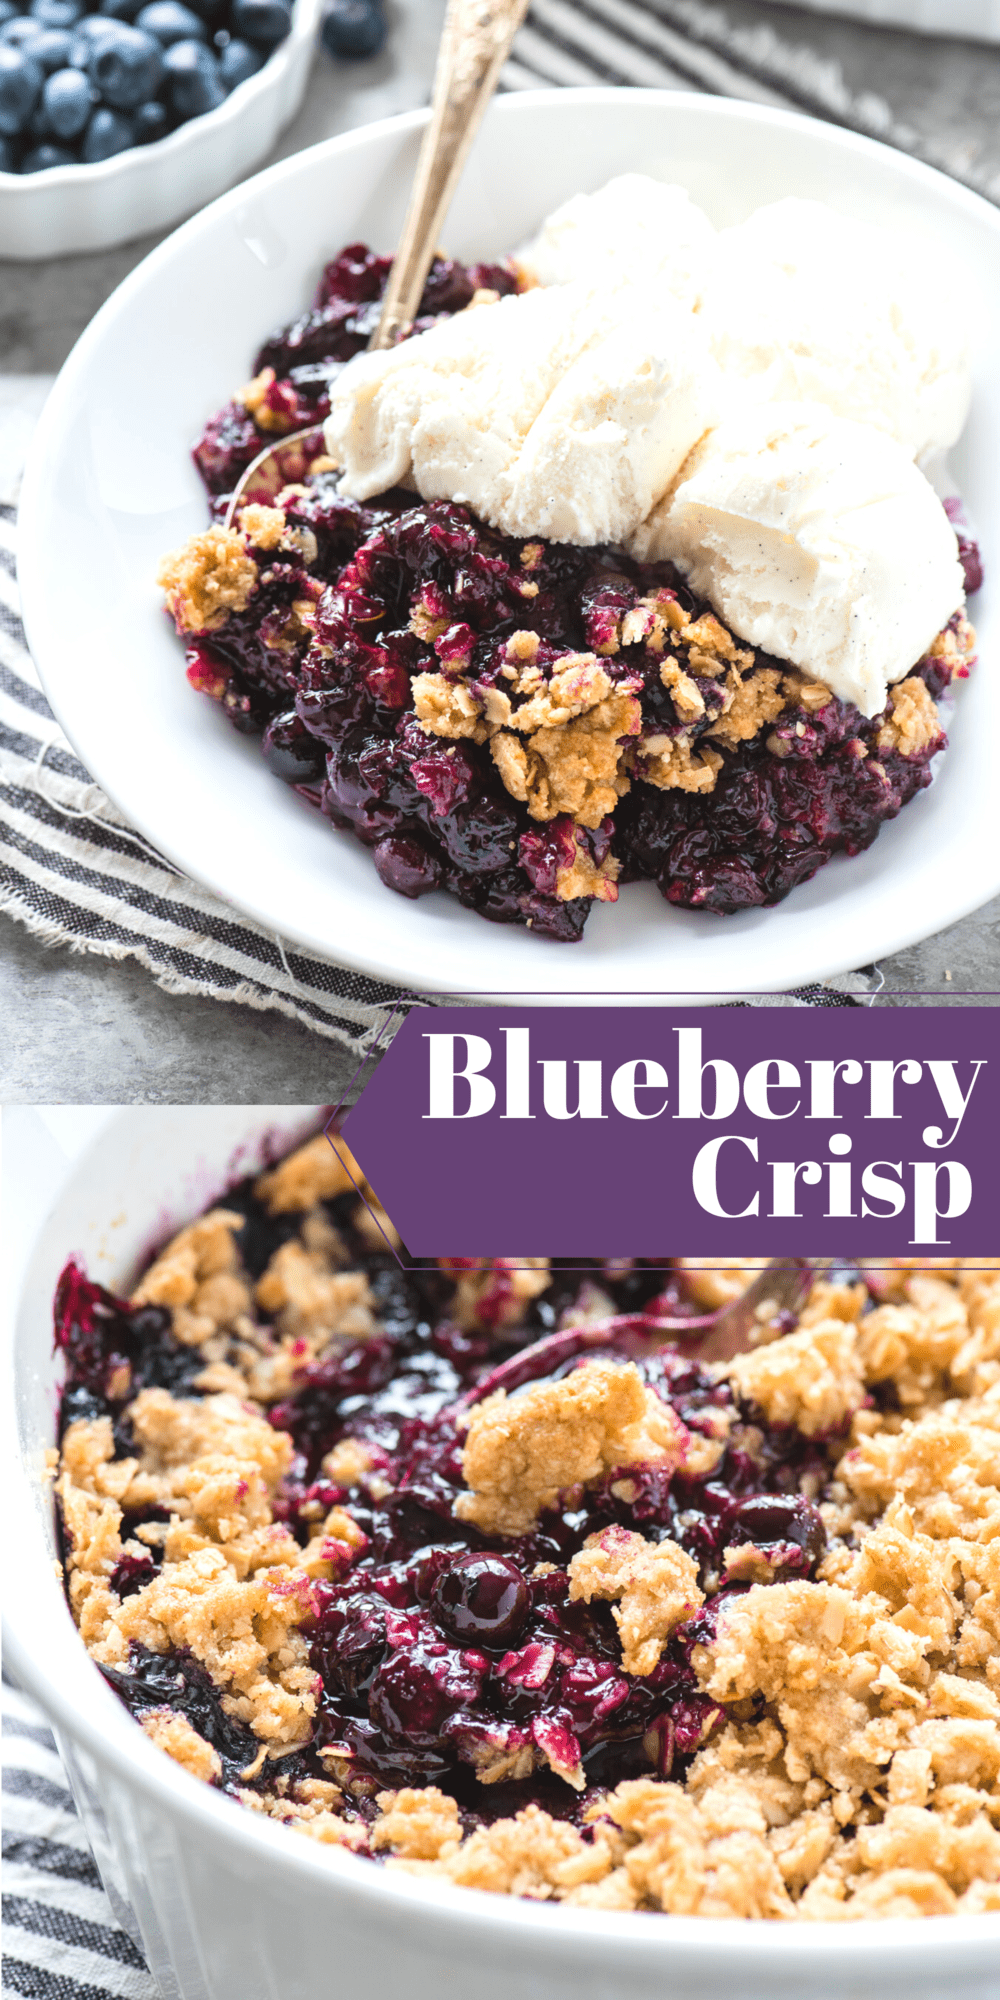 Blueberry Crisp with Oatmeal (with Expert Tips) - The First Year